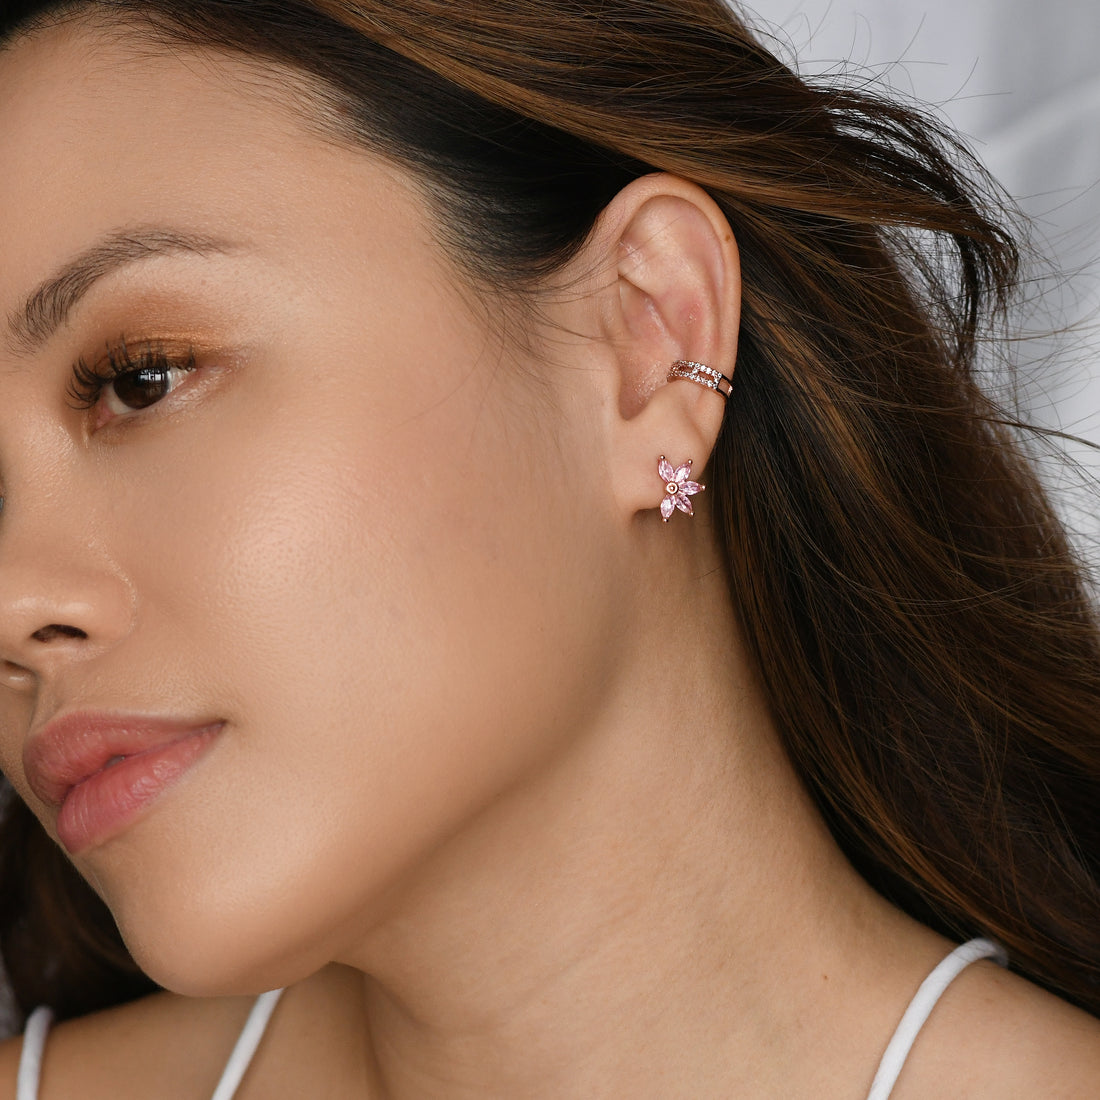 Lily Stud | Pink Rose Gold